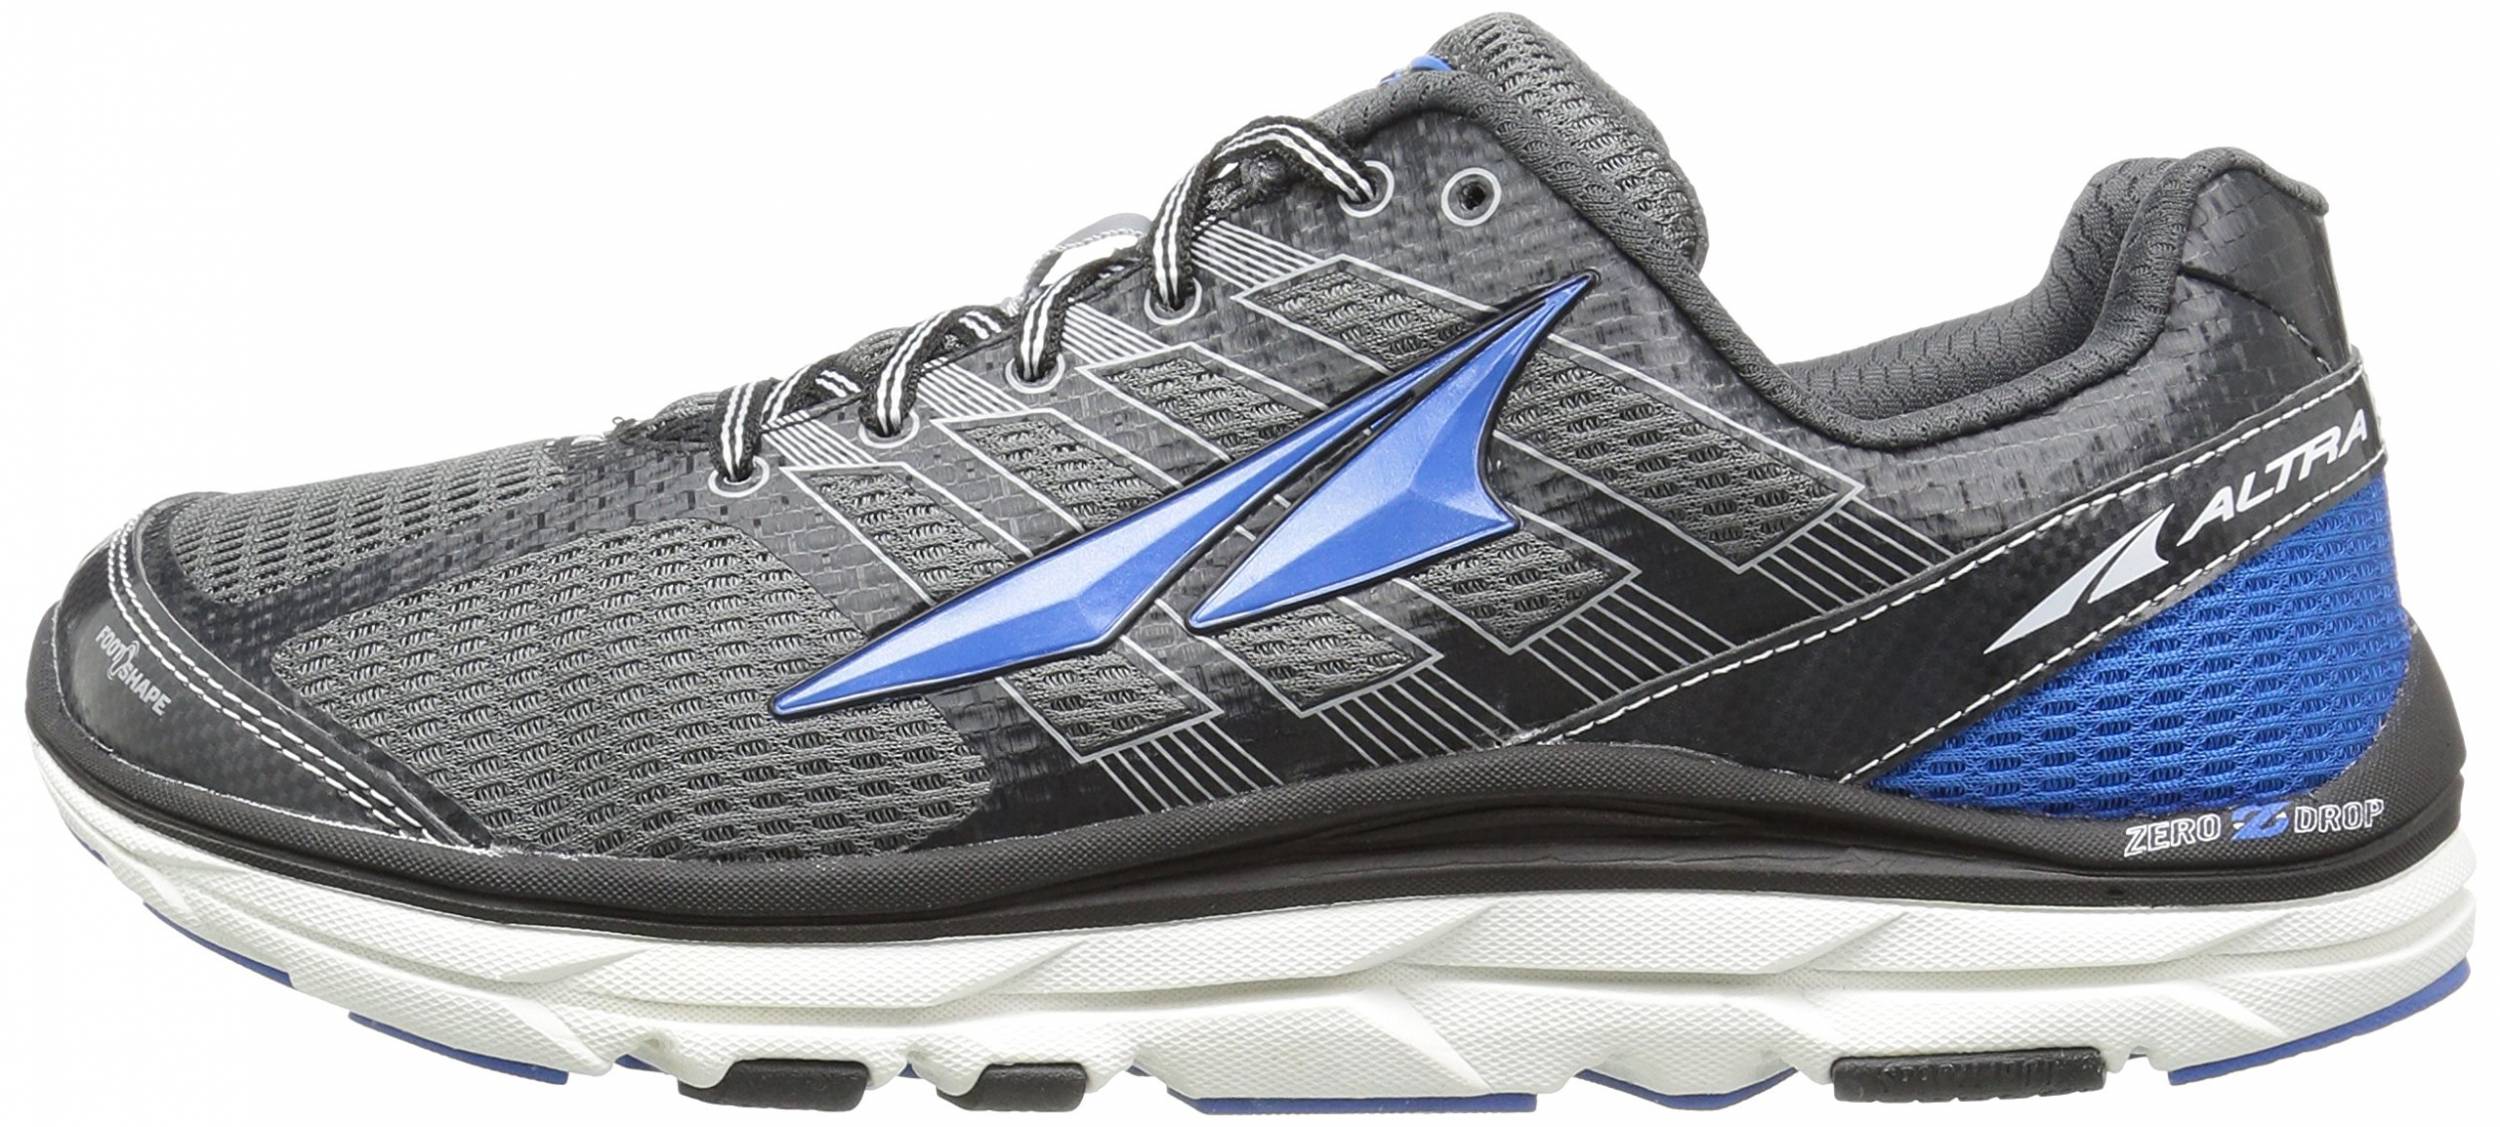 Altra Stability Running Shoes 